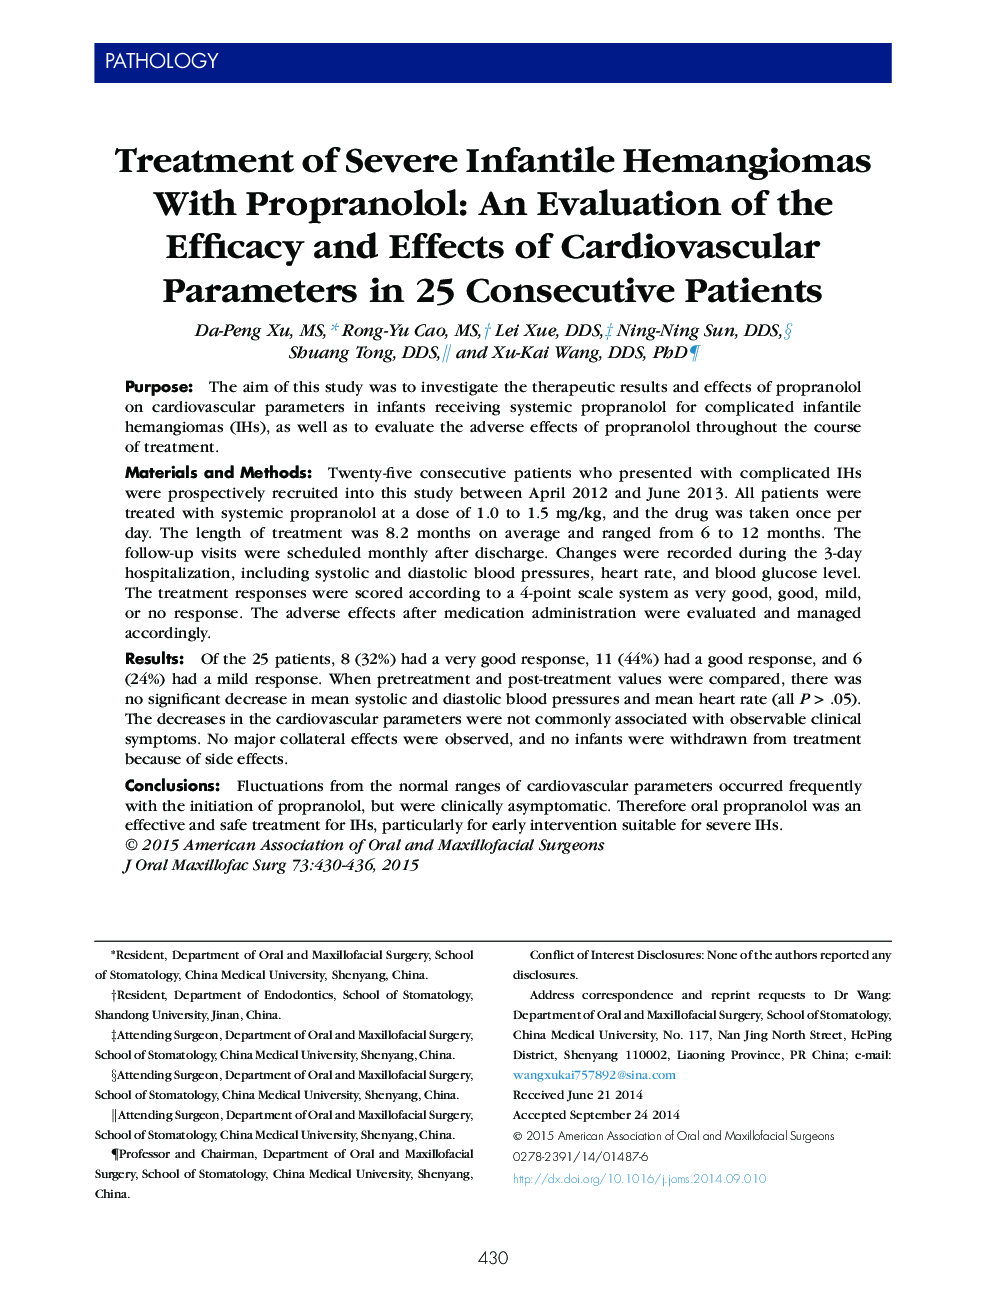 Treatment of Severe Infantile Hemangiomas With Propranolol: An Evaluation of the Efficacy and Effects of Cardiovascular Parameters in 25 Consecutive Patients 